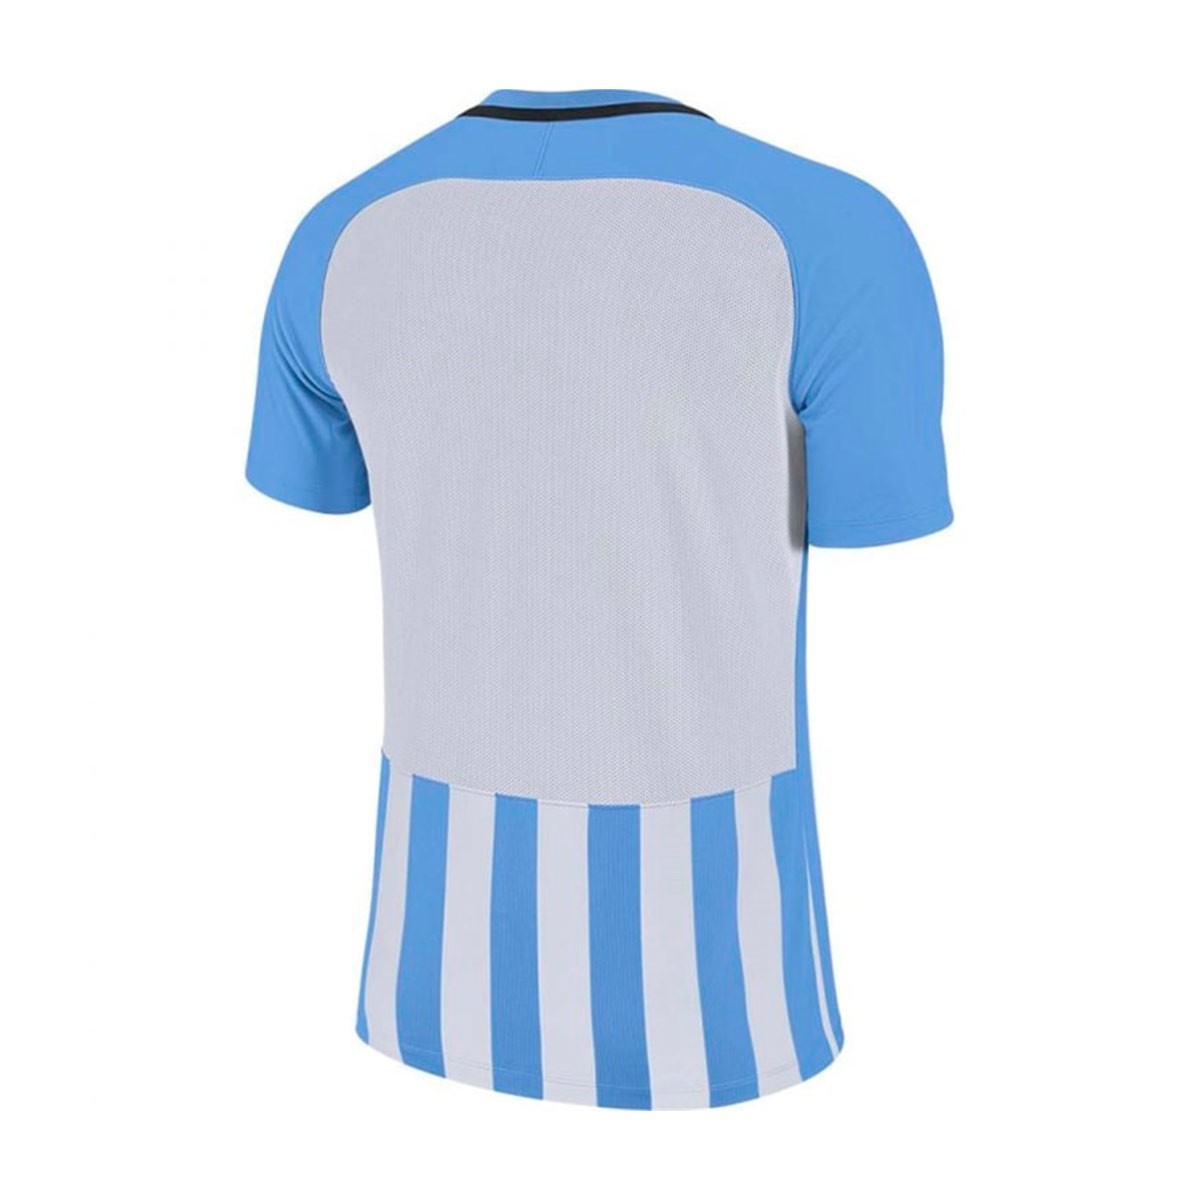 football jersey blue and white